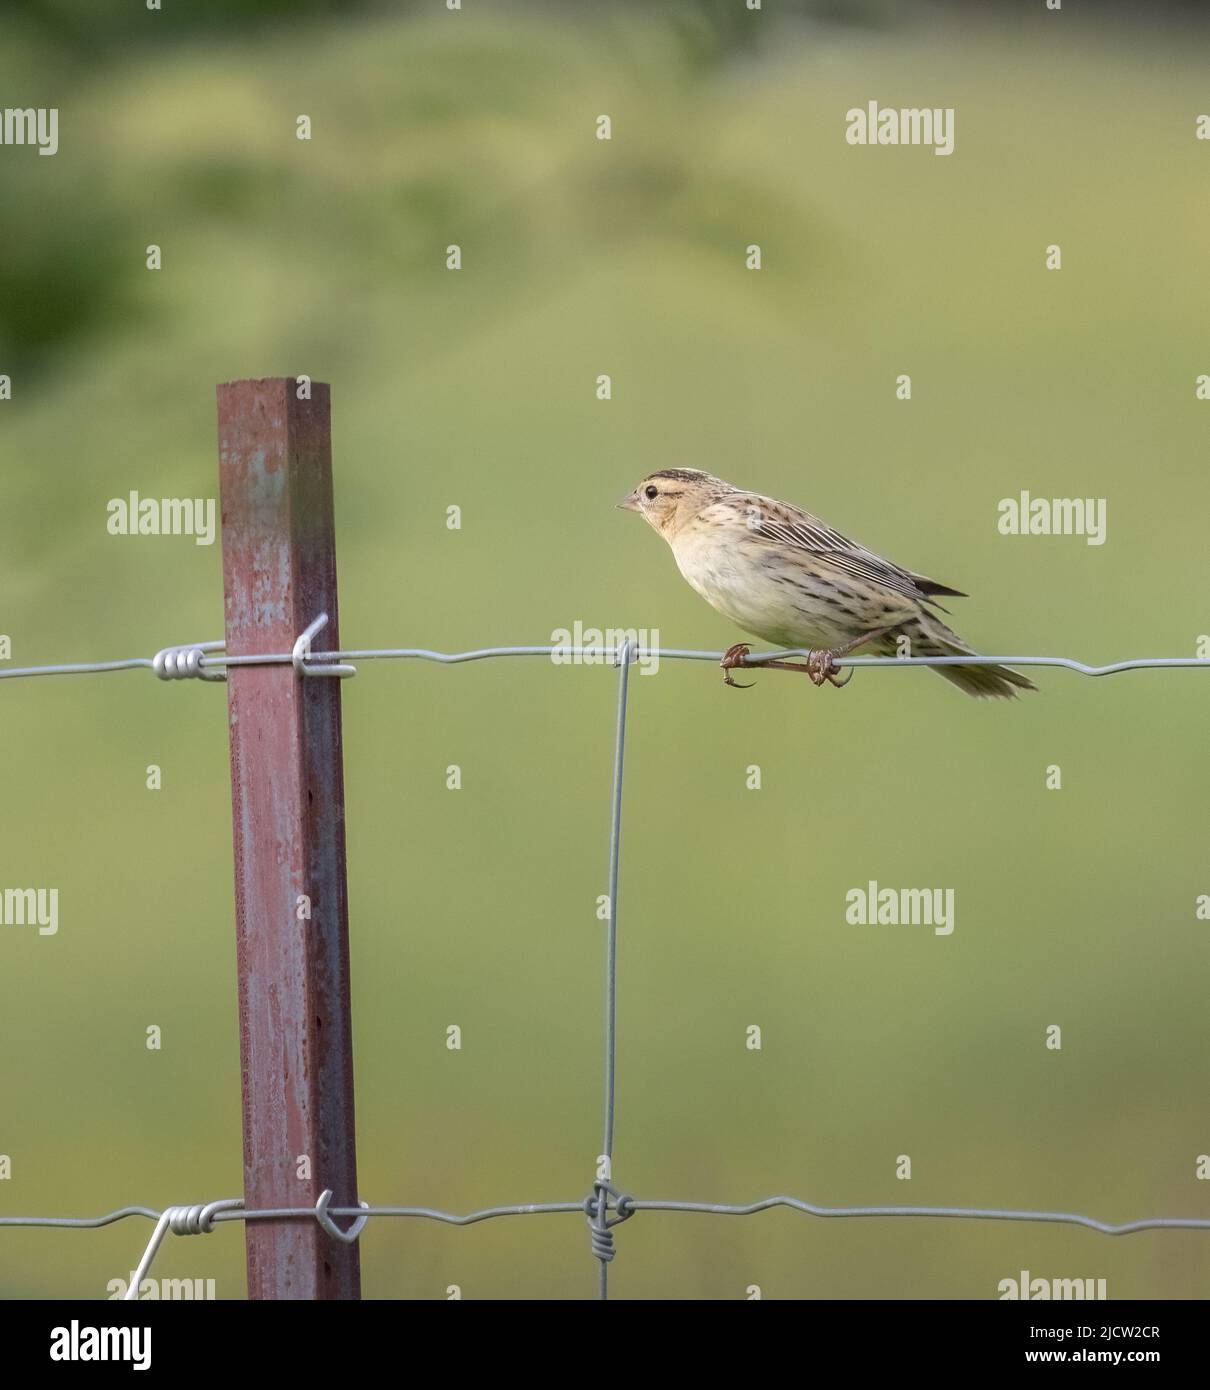 A female Bobolink up close on a wire fence with green background Stock Photo